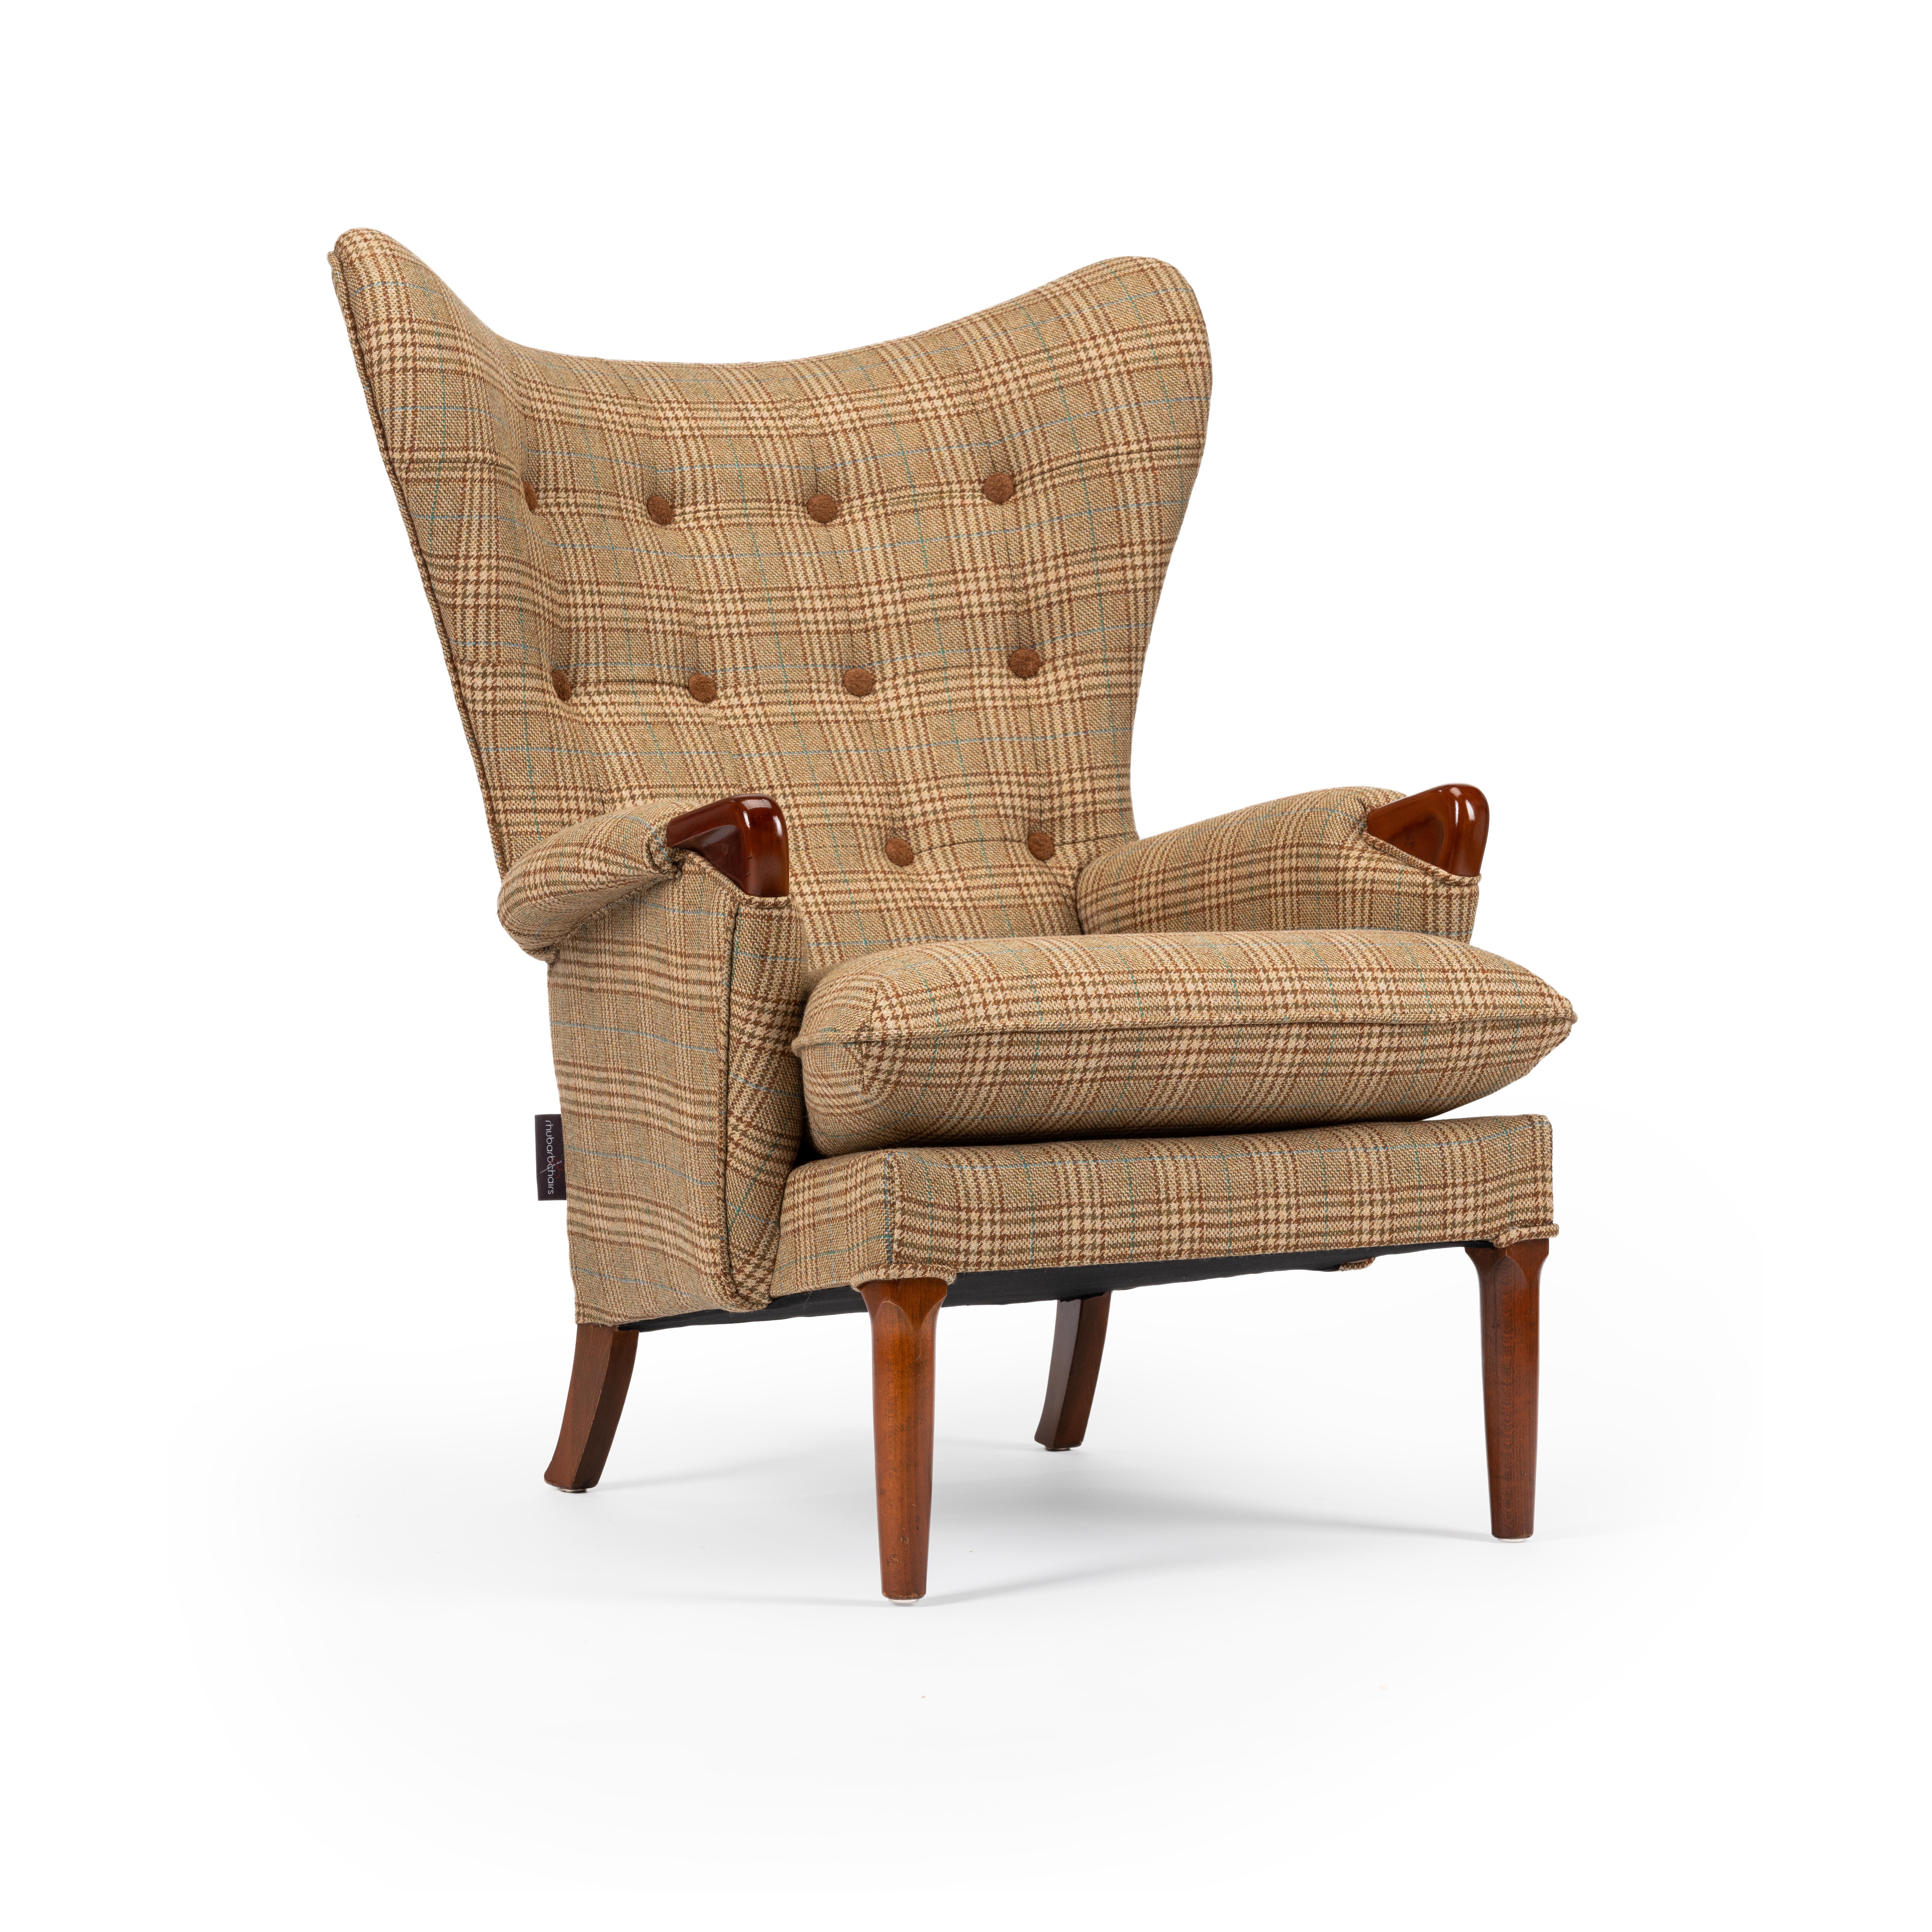 Midcentury vintage wingback chairs reupholstered in Yorkshire Tweed, circa 1960s

Stunning matching pair of Mid-Century Modern oversized 'wraparound' vintage 1960s wing chairs reupholstered in a peat and moss colored 100% wool Yorkshire Tweed with